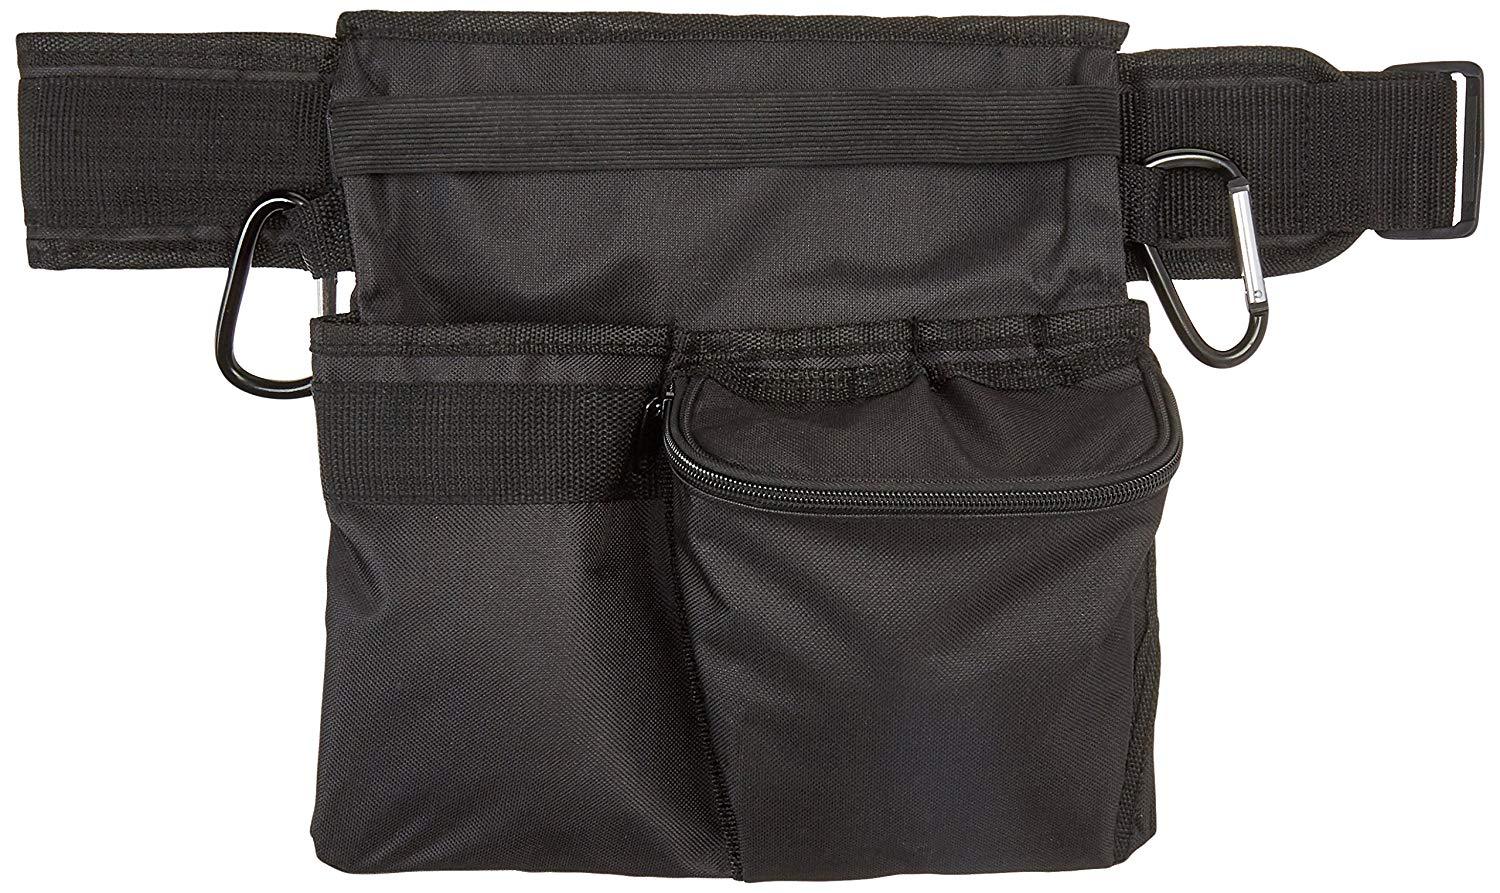 3 Pocket Prospectors Utility Belt & Pouch w/two 3" Carabiner, 600 Denier Nylon Material Bags and Backpacks Detector Pro 